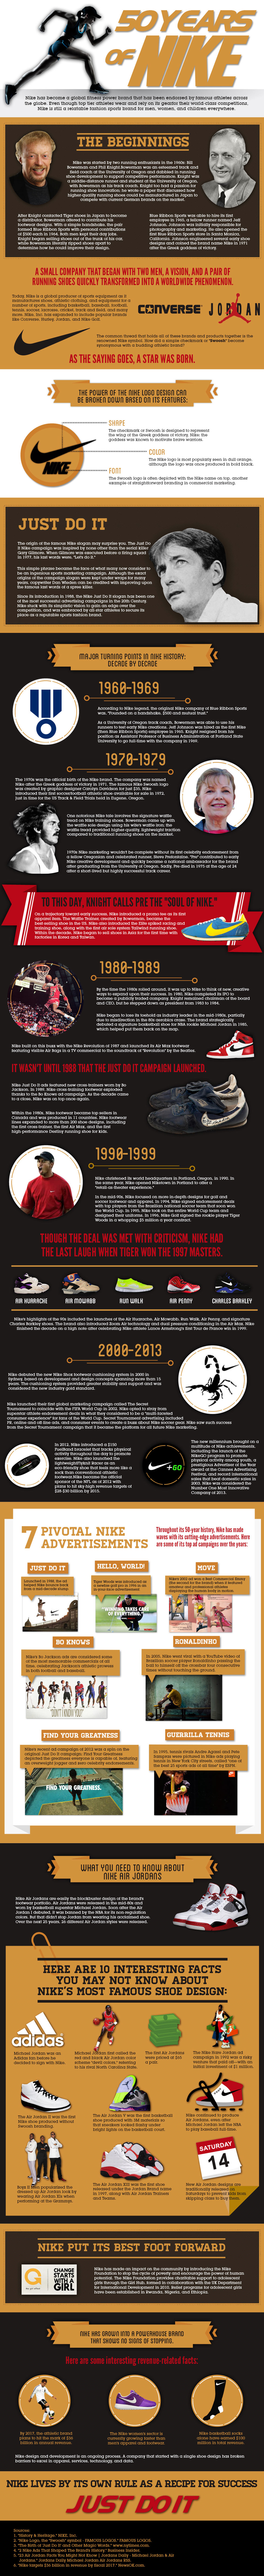 History of Nike - First 50 Years Company Infographic